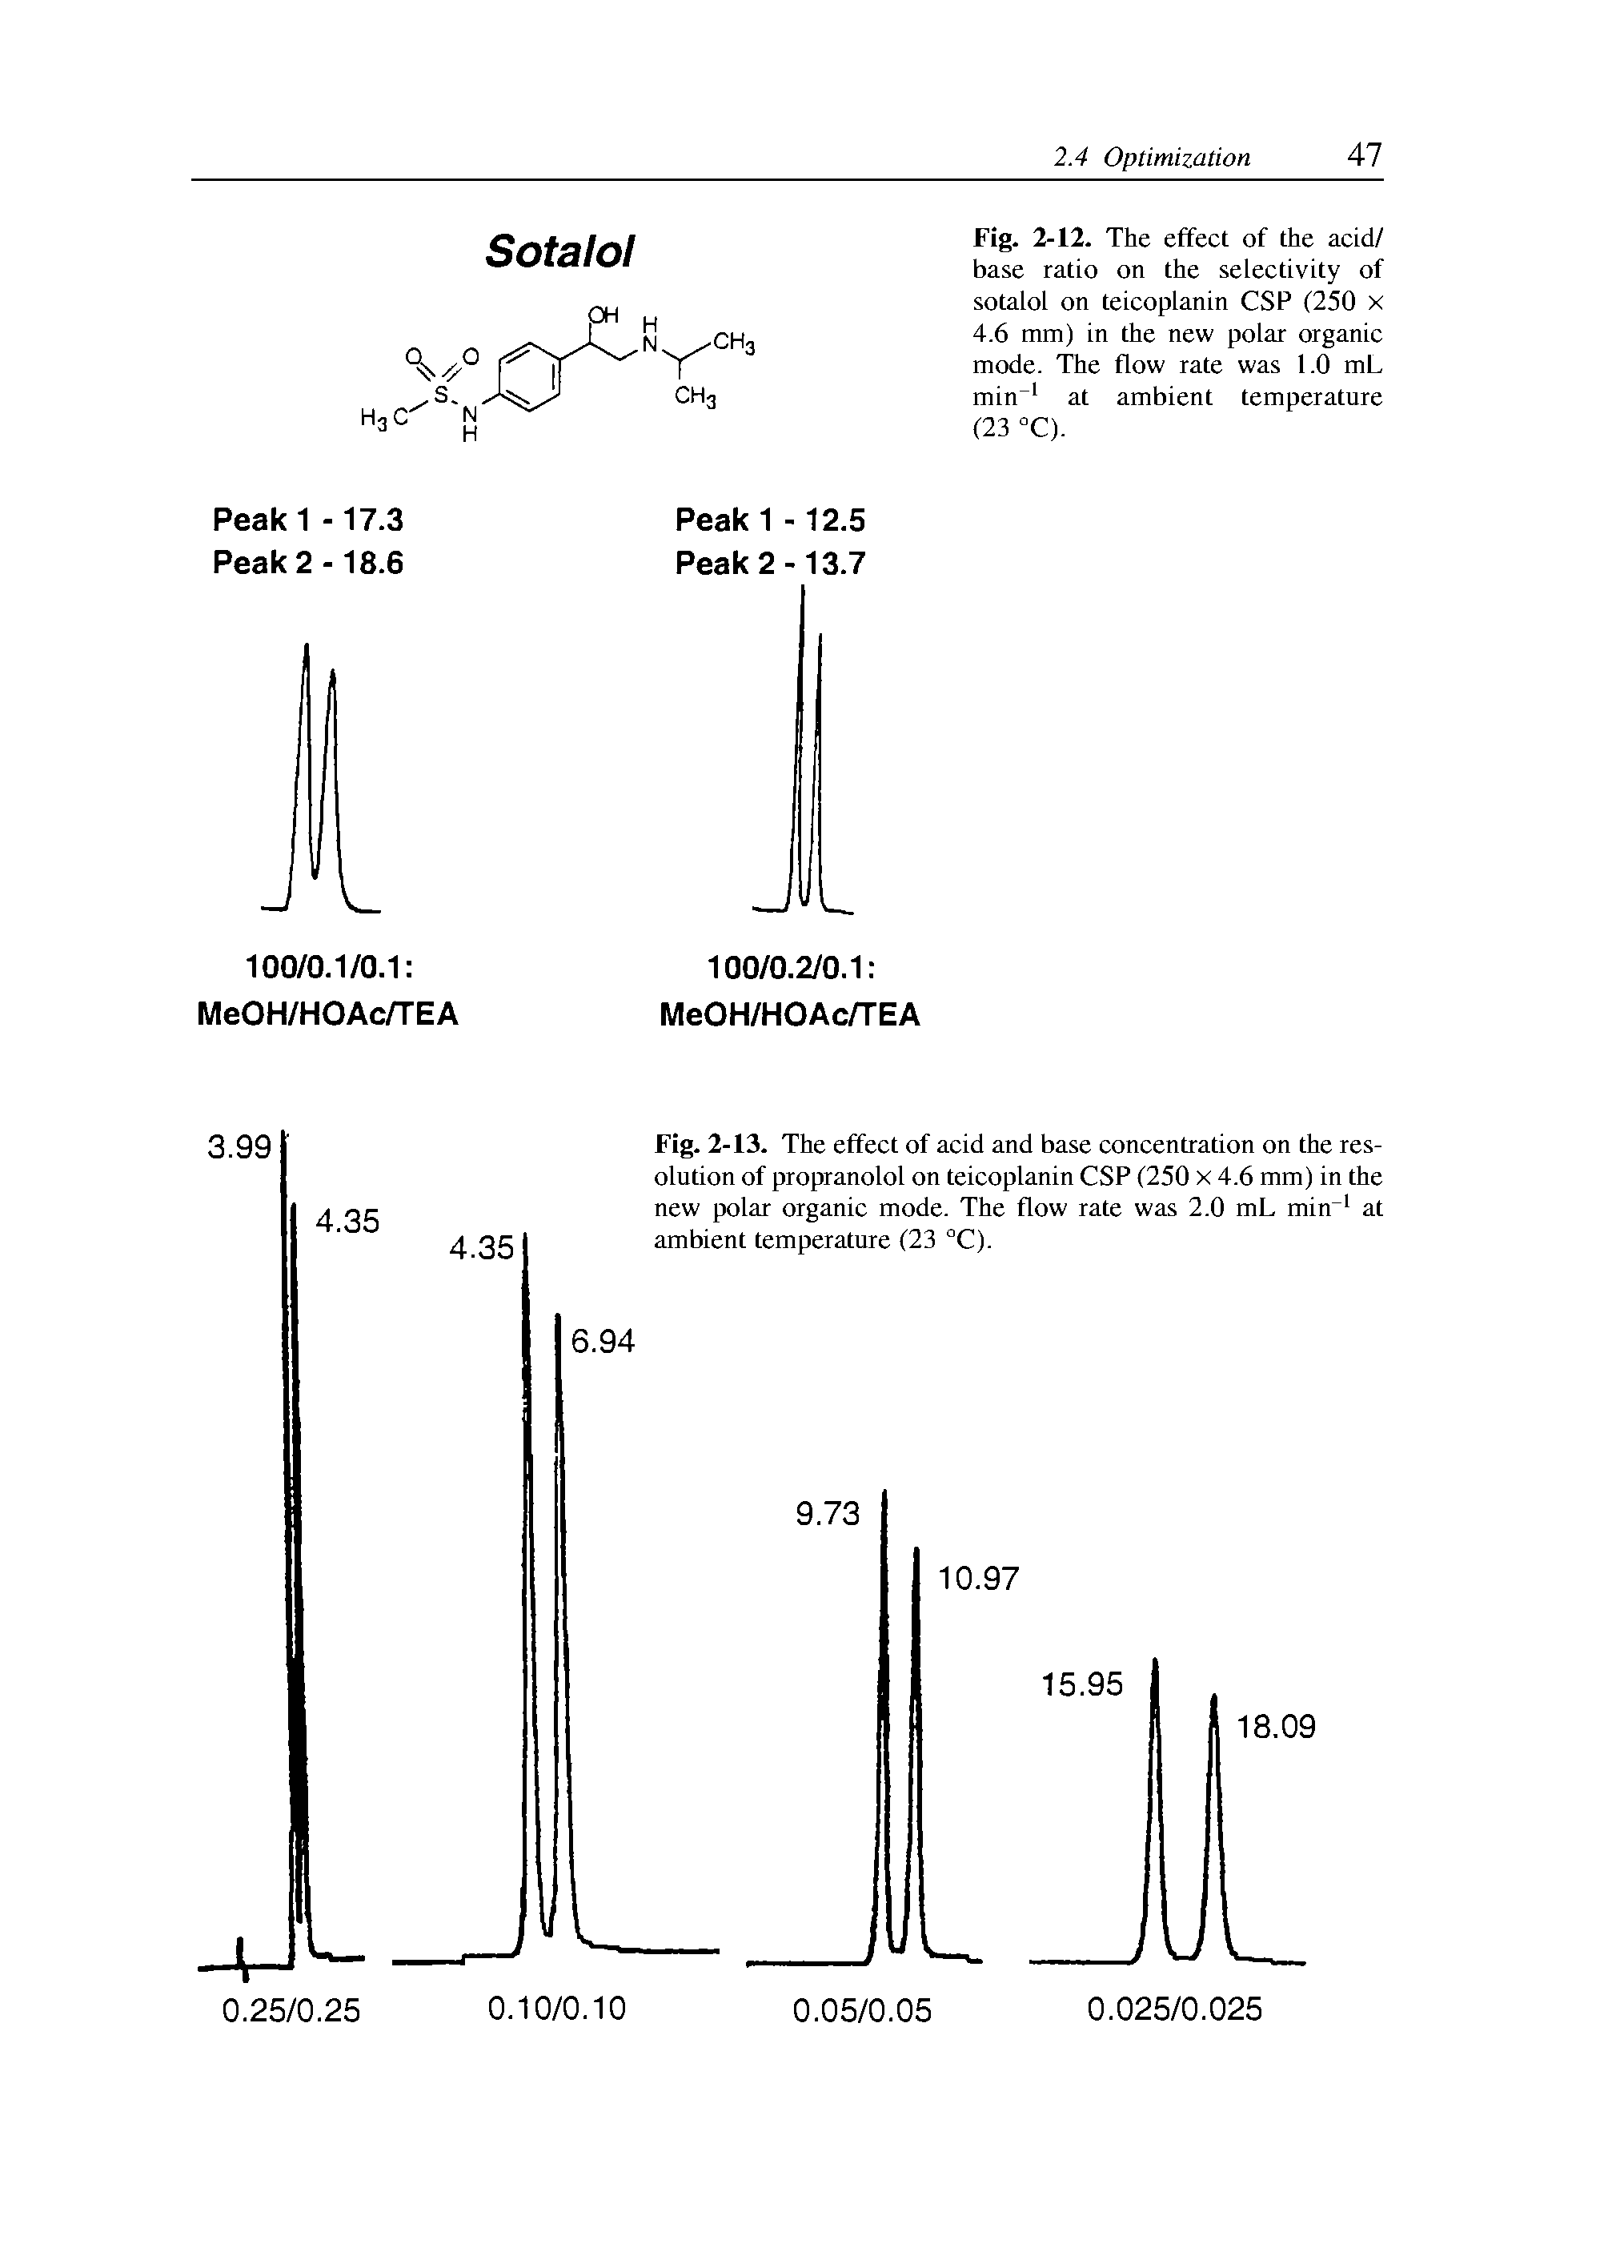 Fig. 2-12. The effect of the acid/ base ratio on the selectivity of sotalol on teicoplanin CSP (250 x 4.6 mm) in the new polar organic mode. The flow rate was 1.0 mL min at ambient temperature (23 °C).